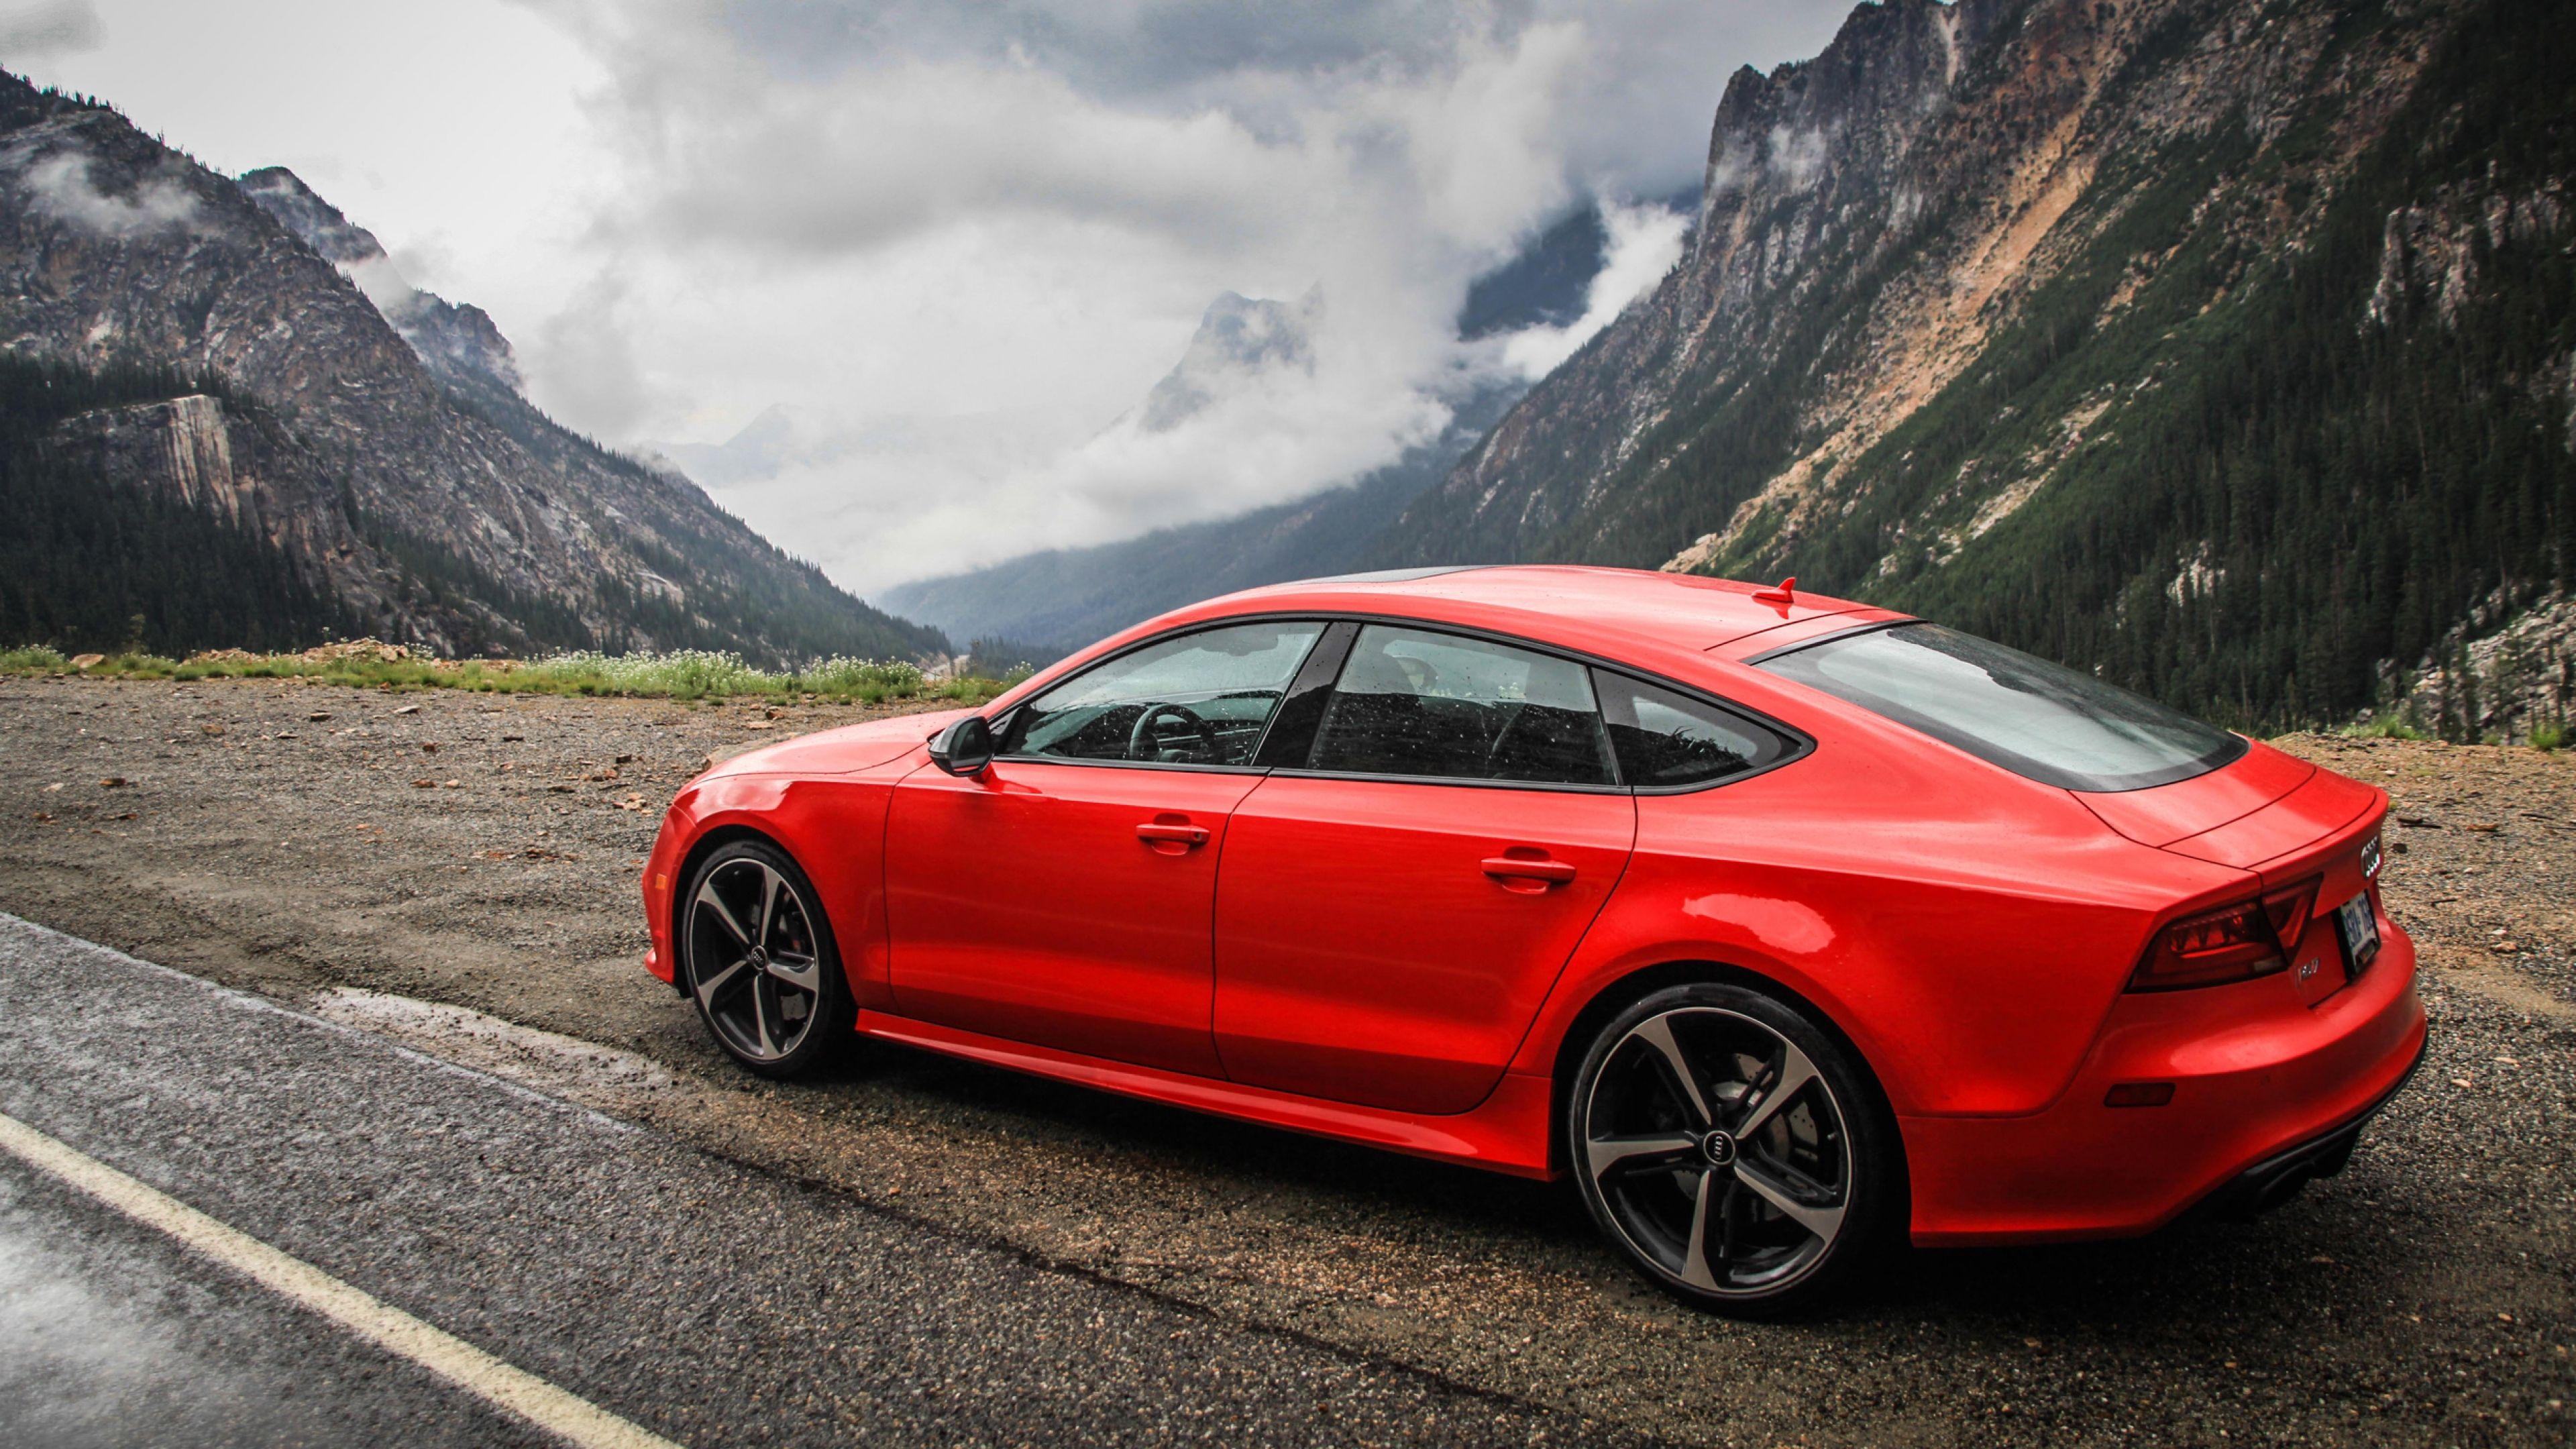 Download Wallpaper 3840x2160 Audi, Rs Red, Side view, Mountain